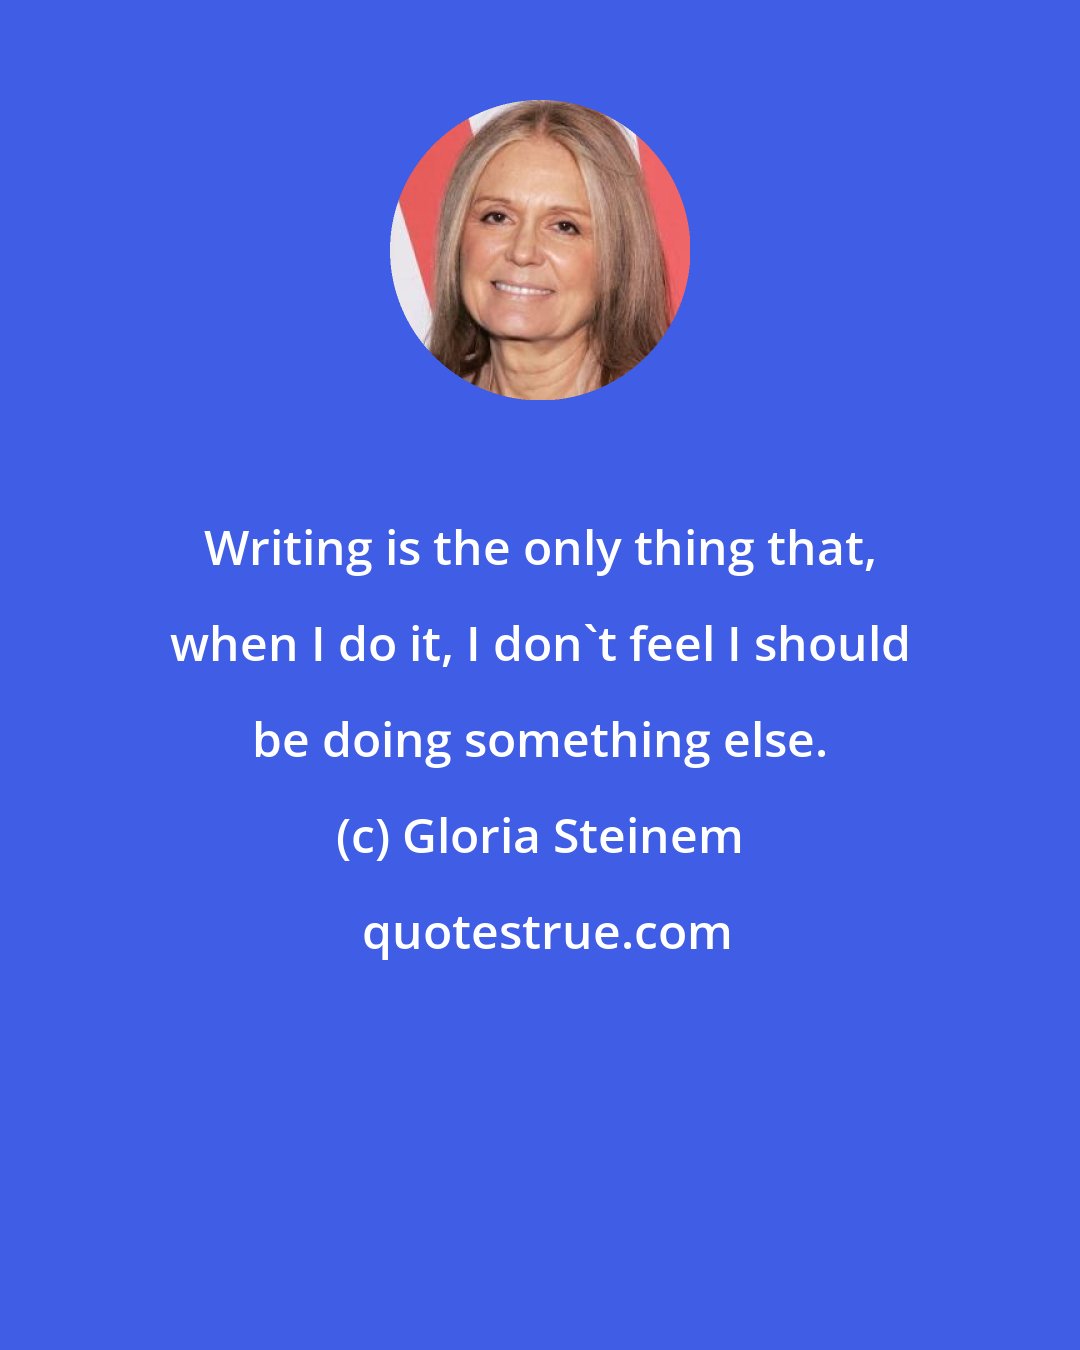 Gloria Steinem: Writing is the only thing that, when I do it, I don't feel I should be doing something else.